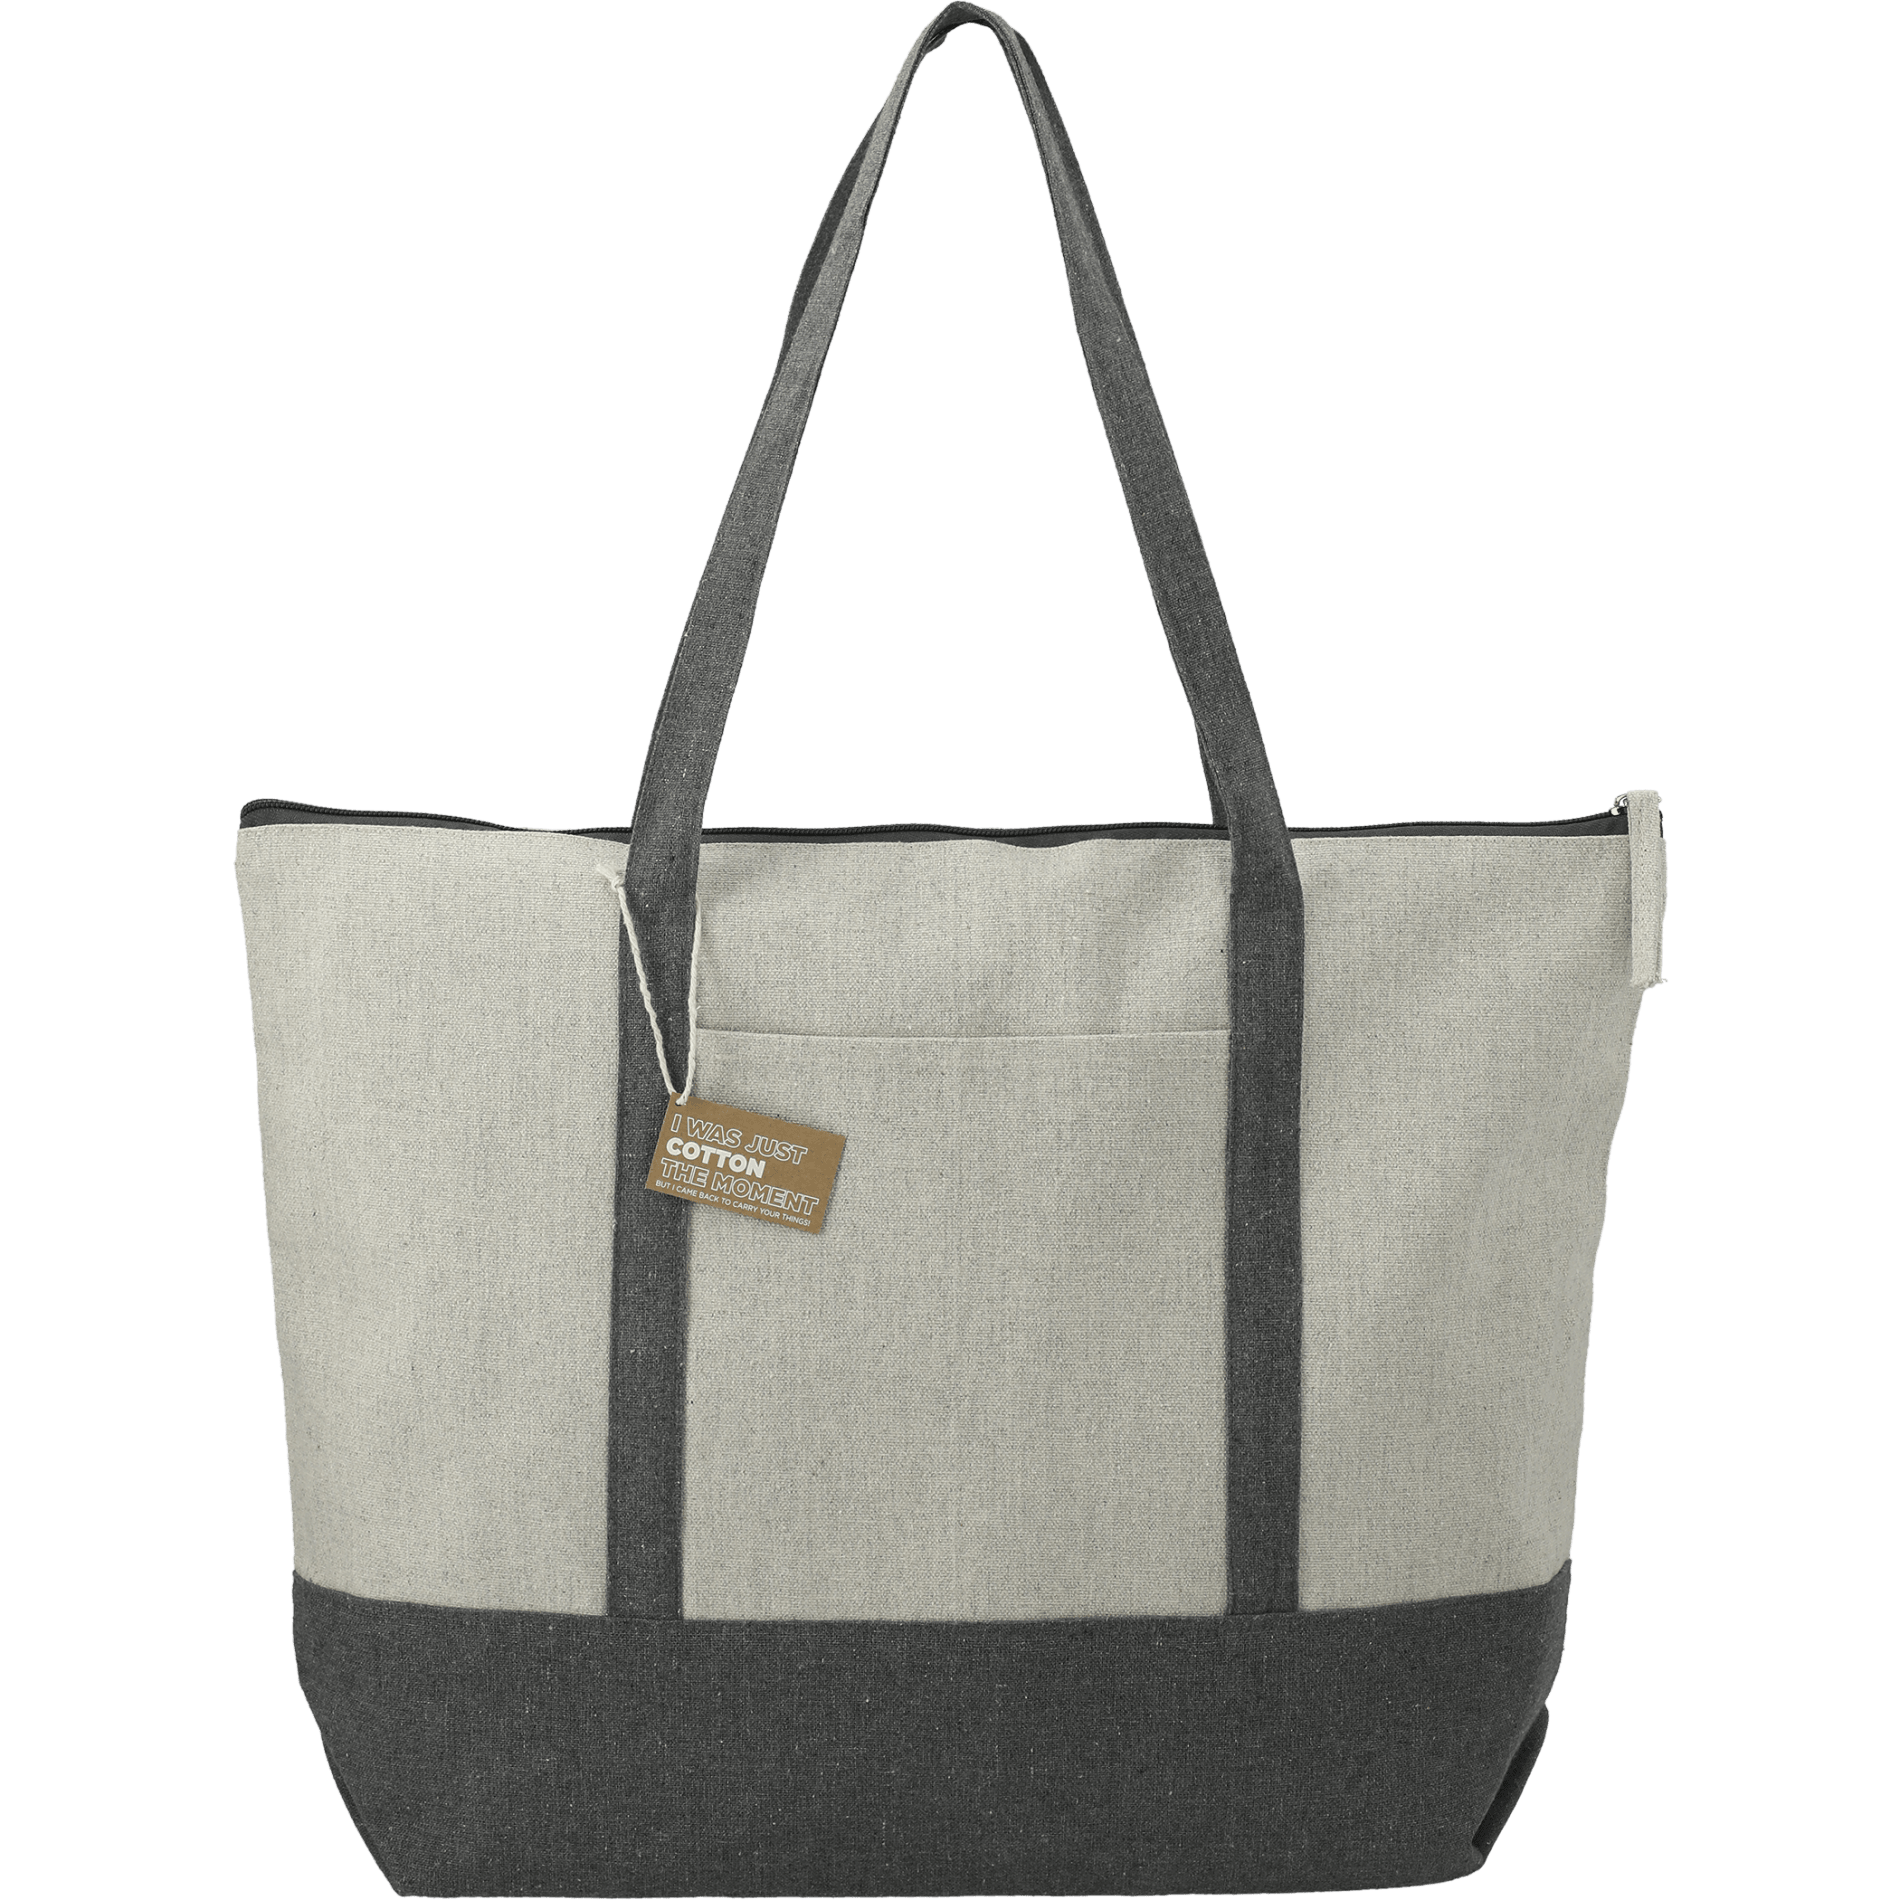 LEEDS 7901-11 - Repose 10oz Recycled Cotton Zippered Tote